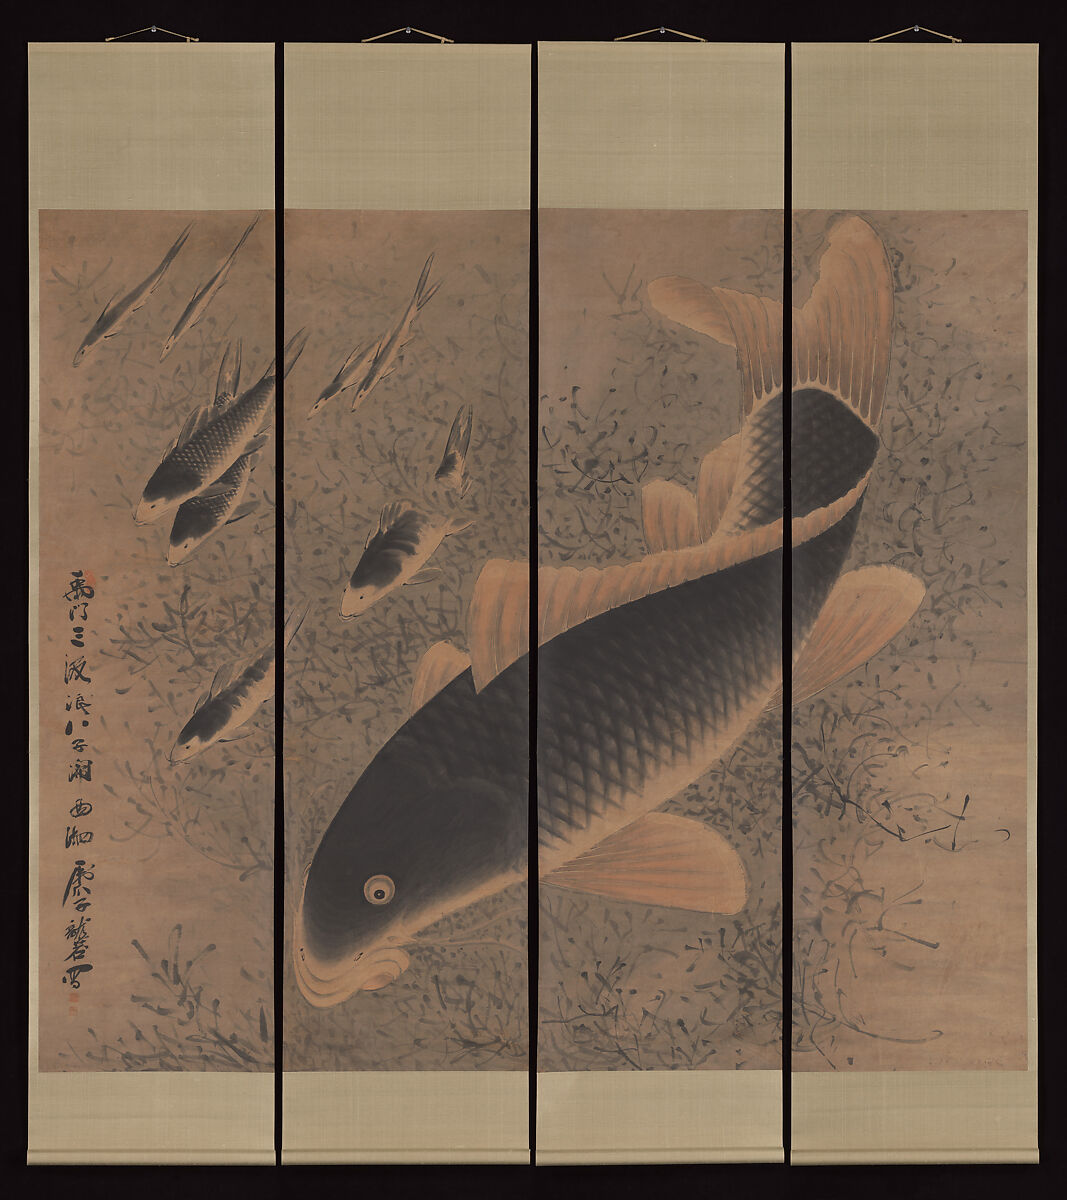 Nine carp, Gong Gu ? Chinese, Set of four hanging scrolls, ink and color on paper, China